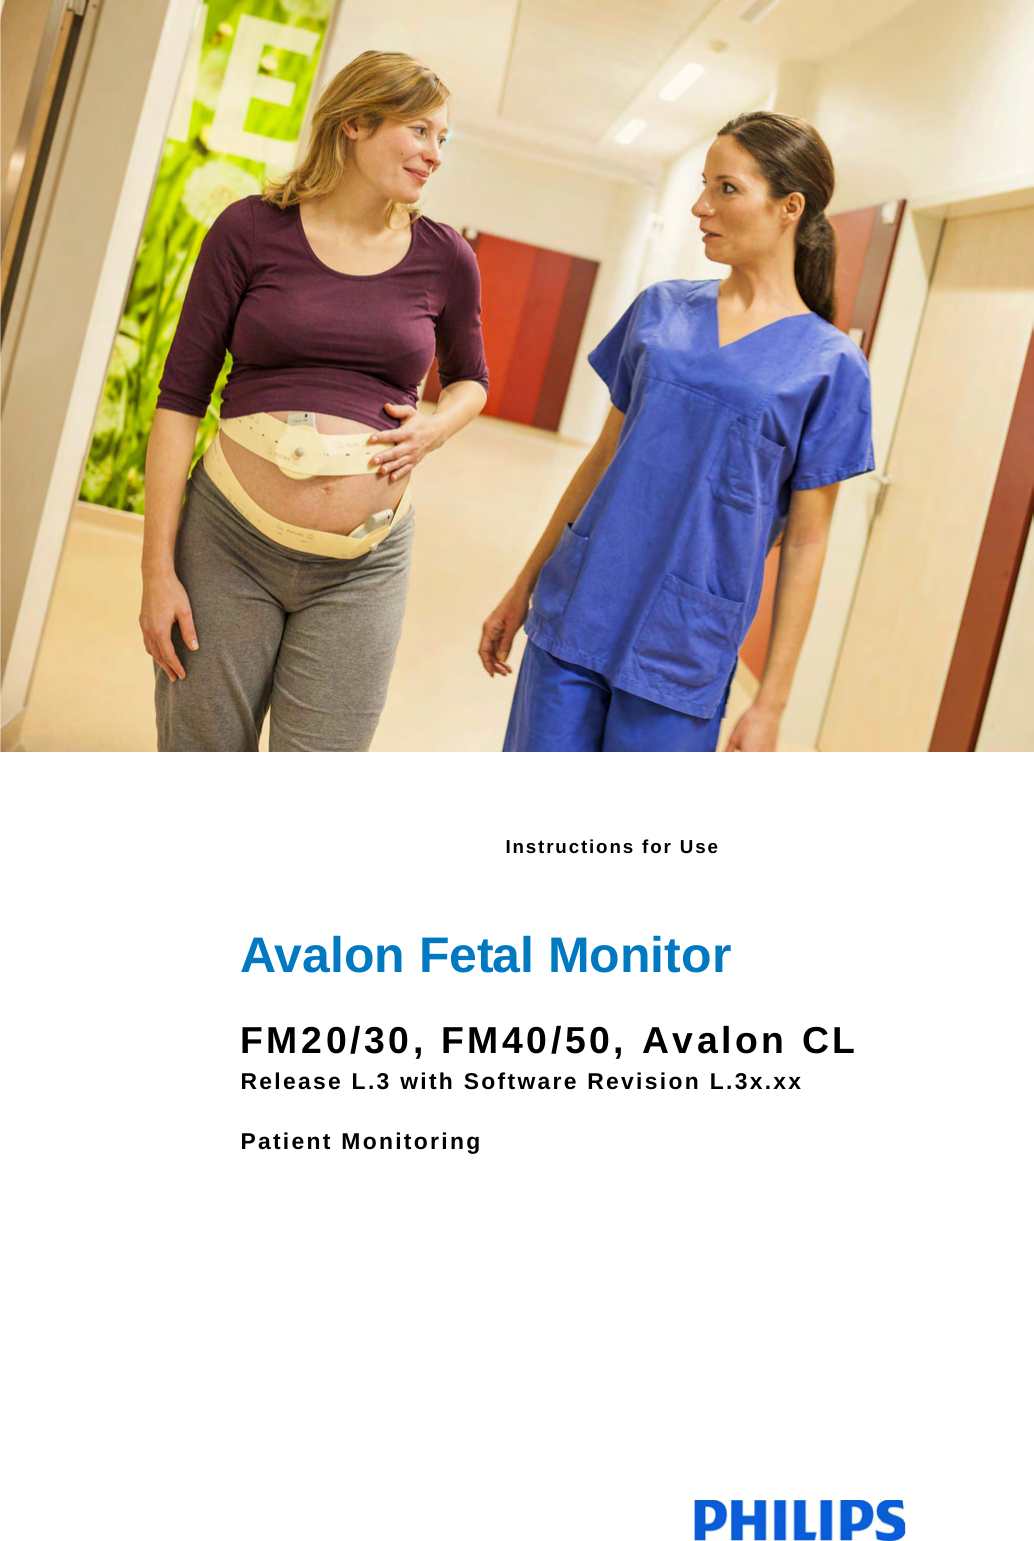 Instructions for Use Avalon Fetal MonitorFM20/30, FM40/50, Avalon CLRelease L.3 with Software Revision L.3x.xxPatient Monitoring